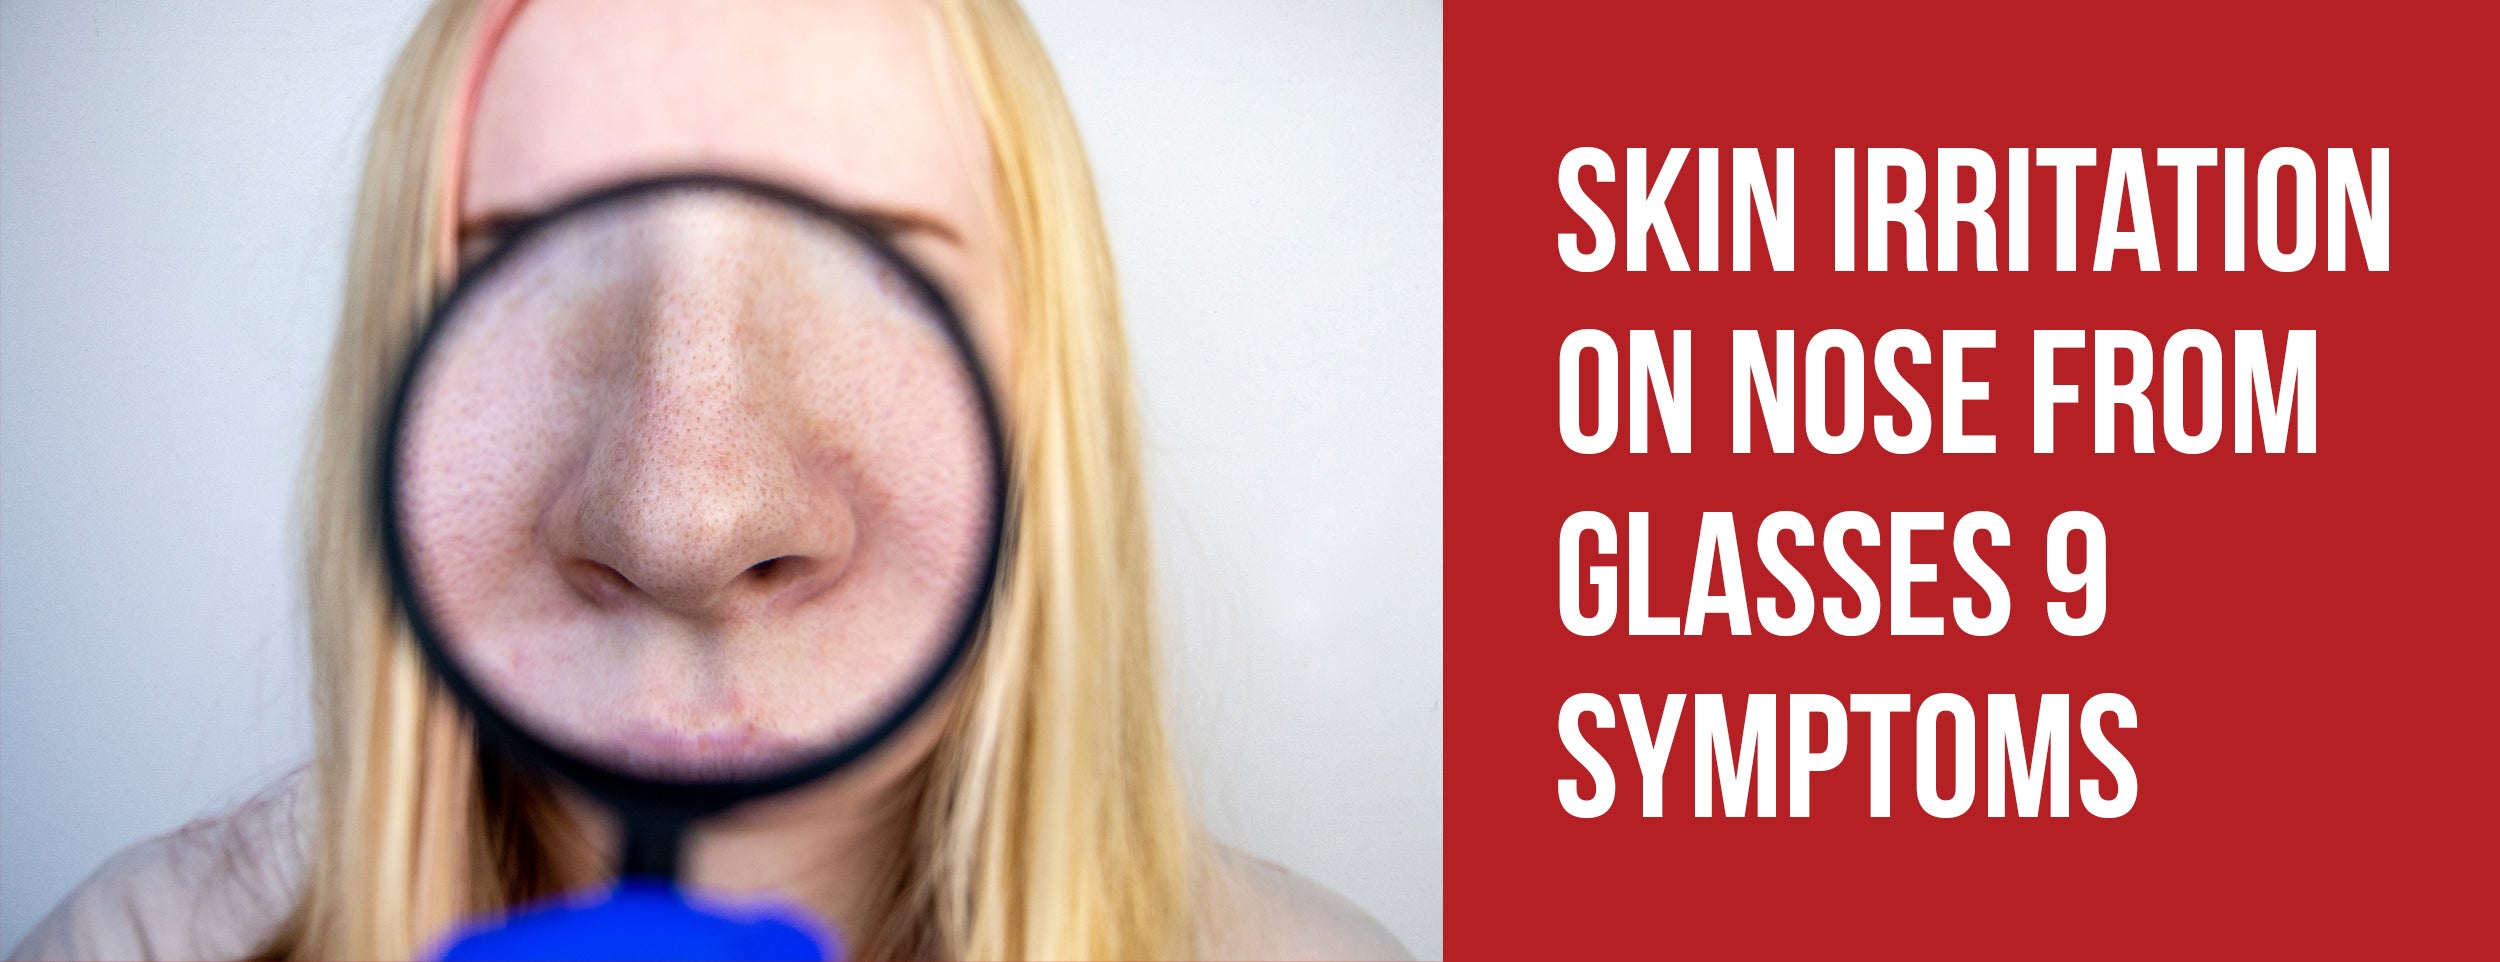 The symptoms of skin irritation caused by glasses on the nose